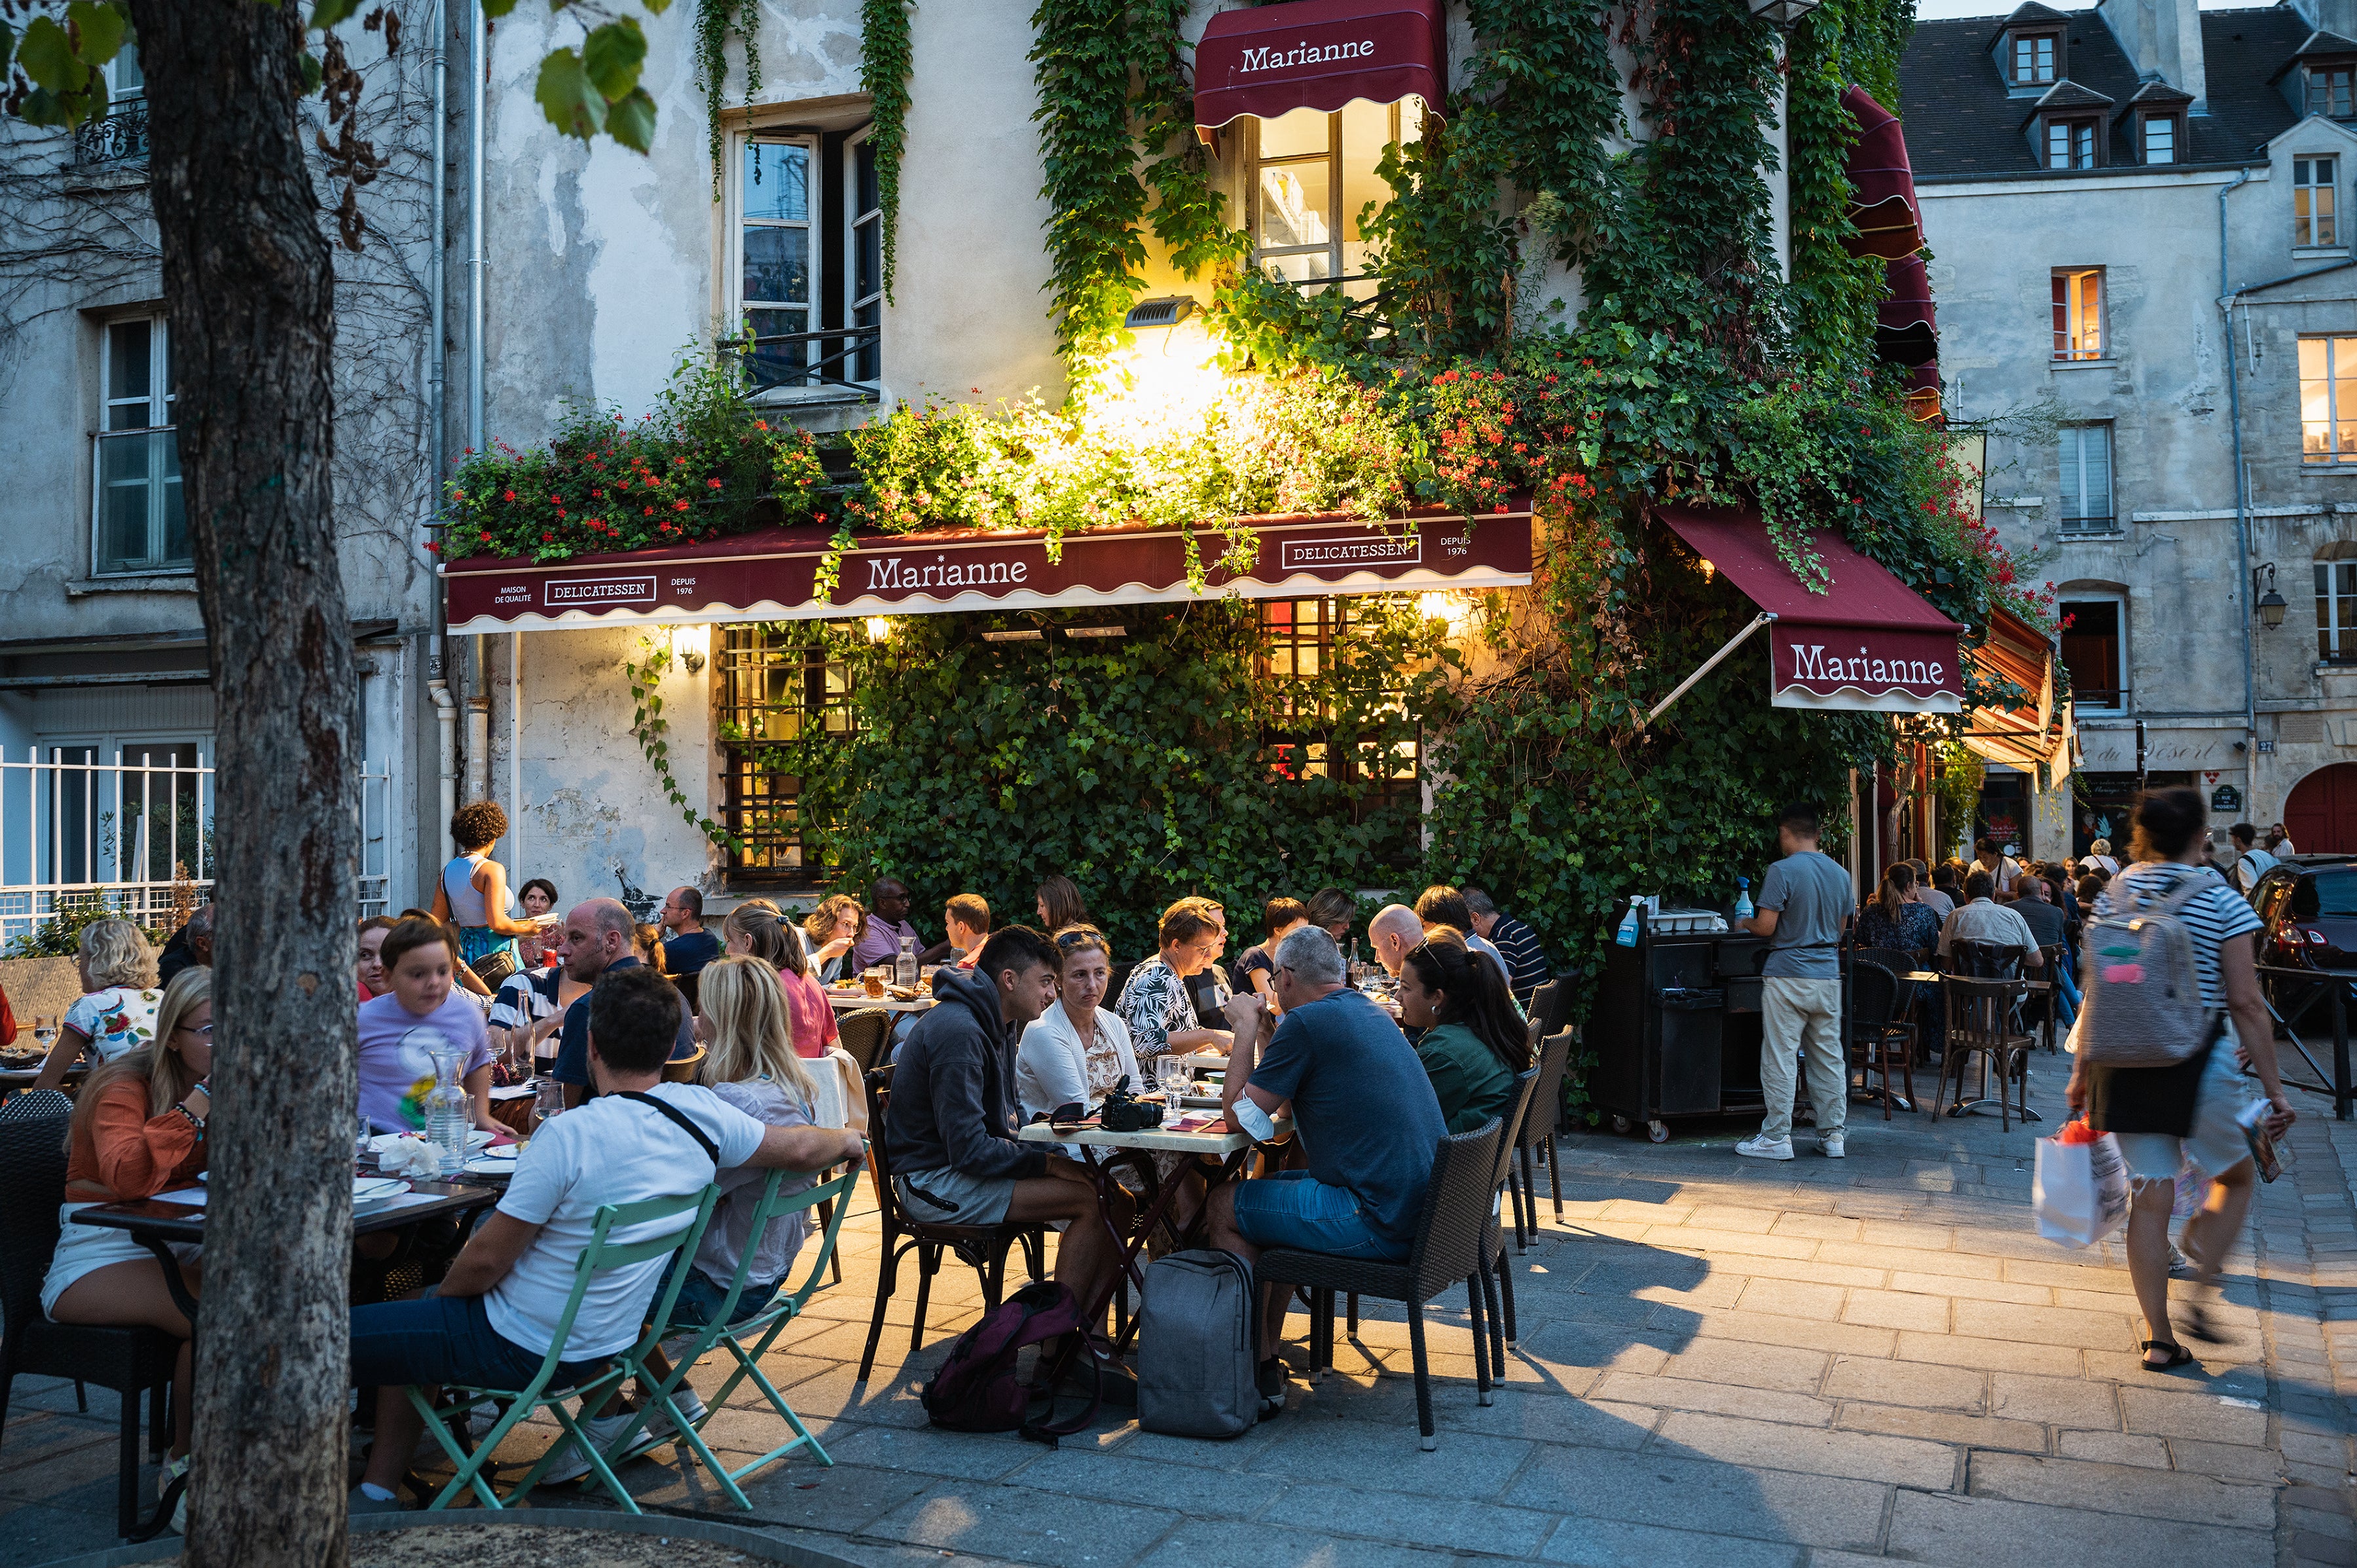 A range of hip restaurants and buzzing cafes line the cobbled streets